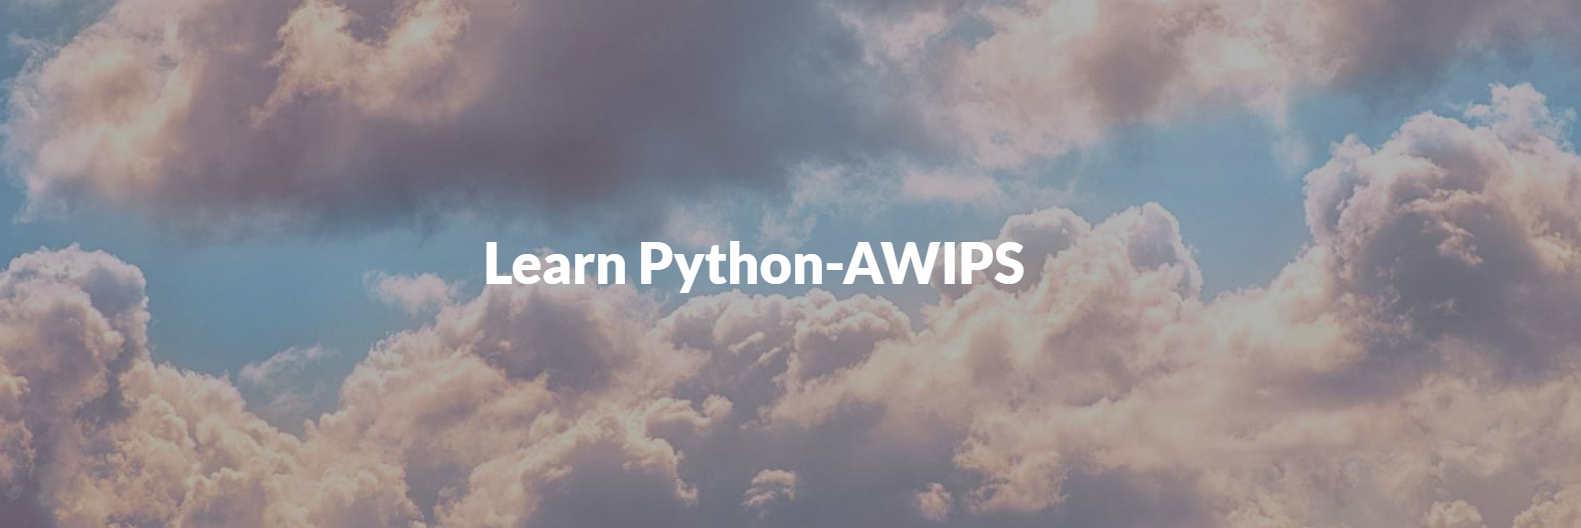 Learn Python-AWIPS Banner